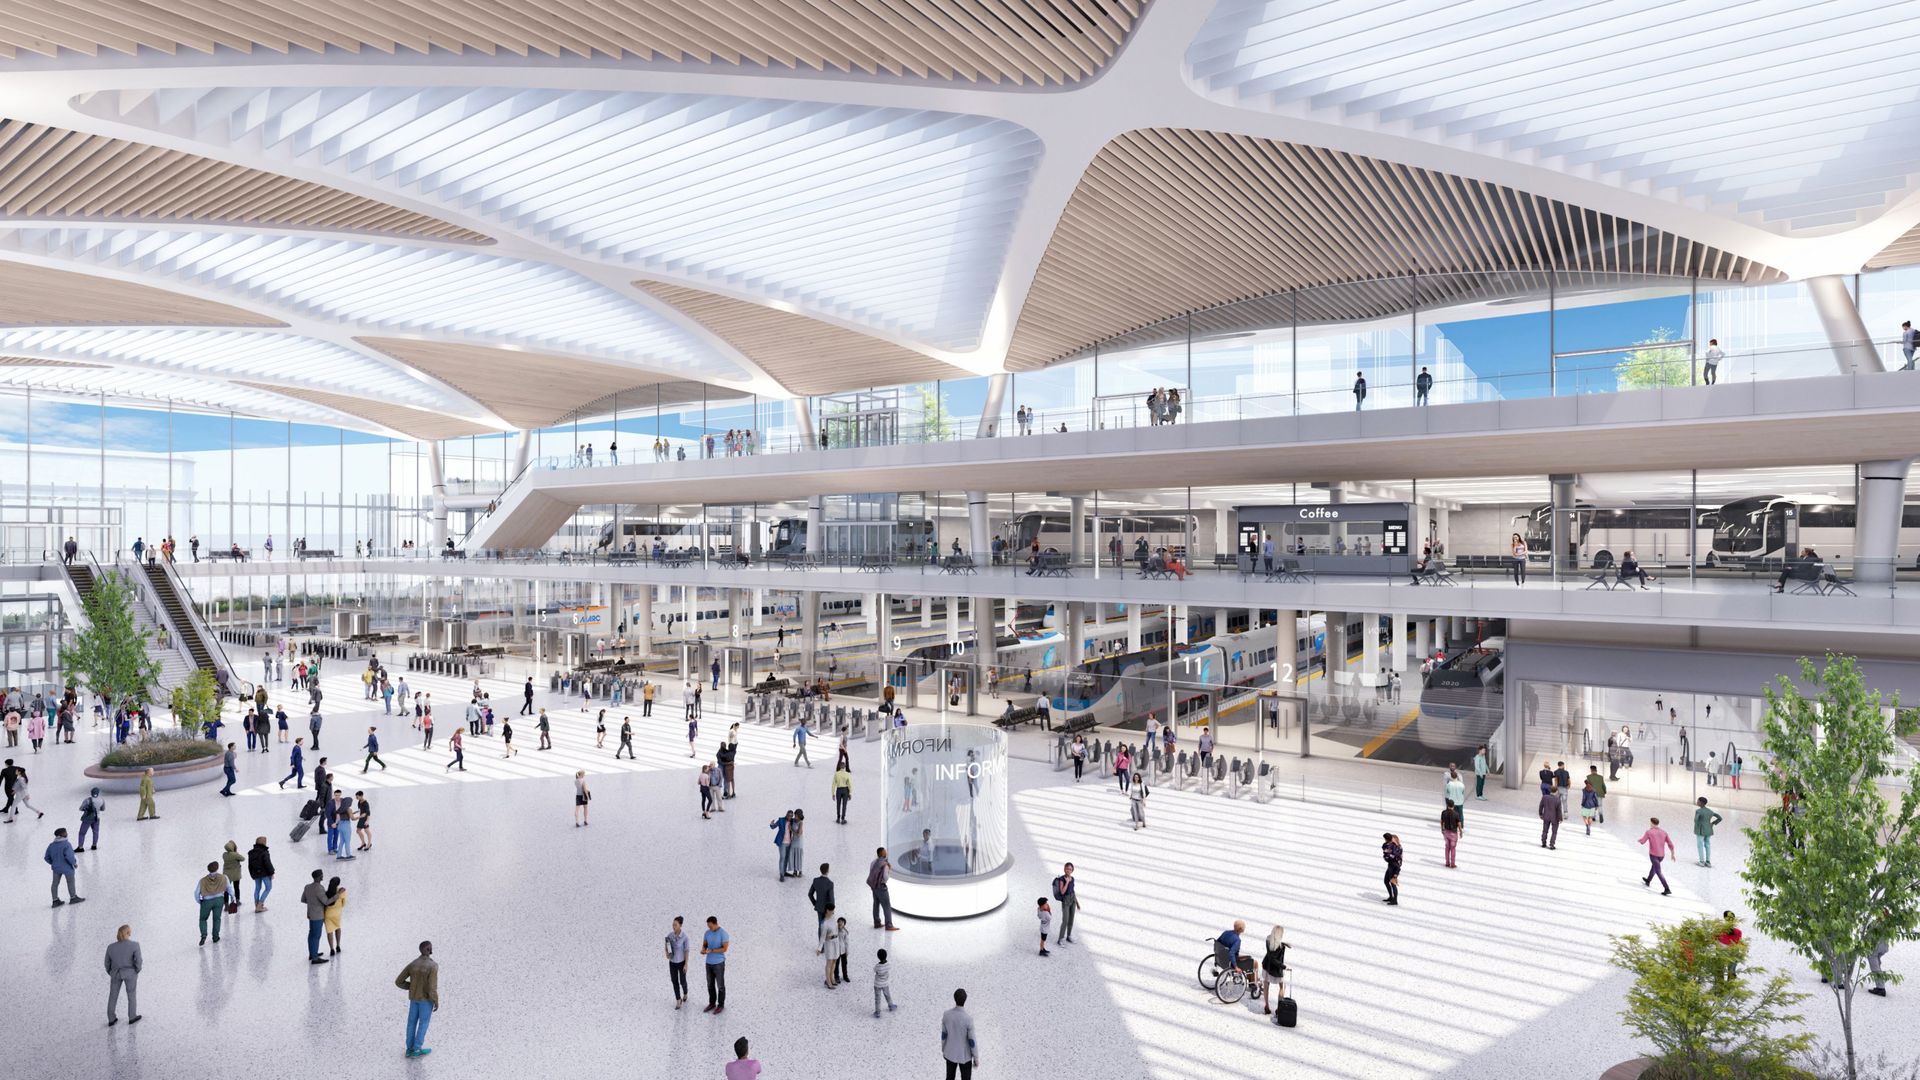 A rendering of the future plans for Washington, D.C.'s Union Station.